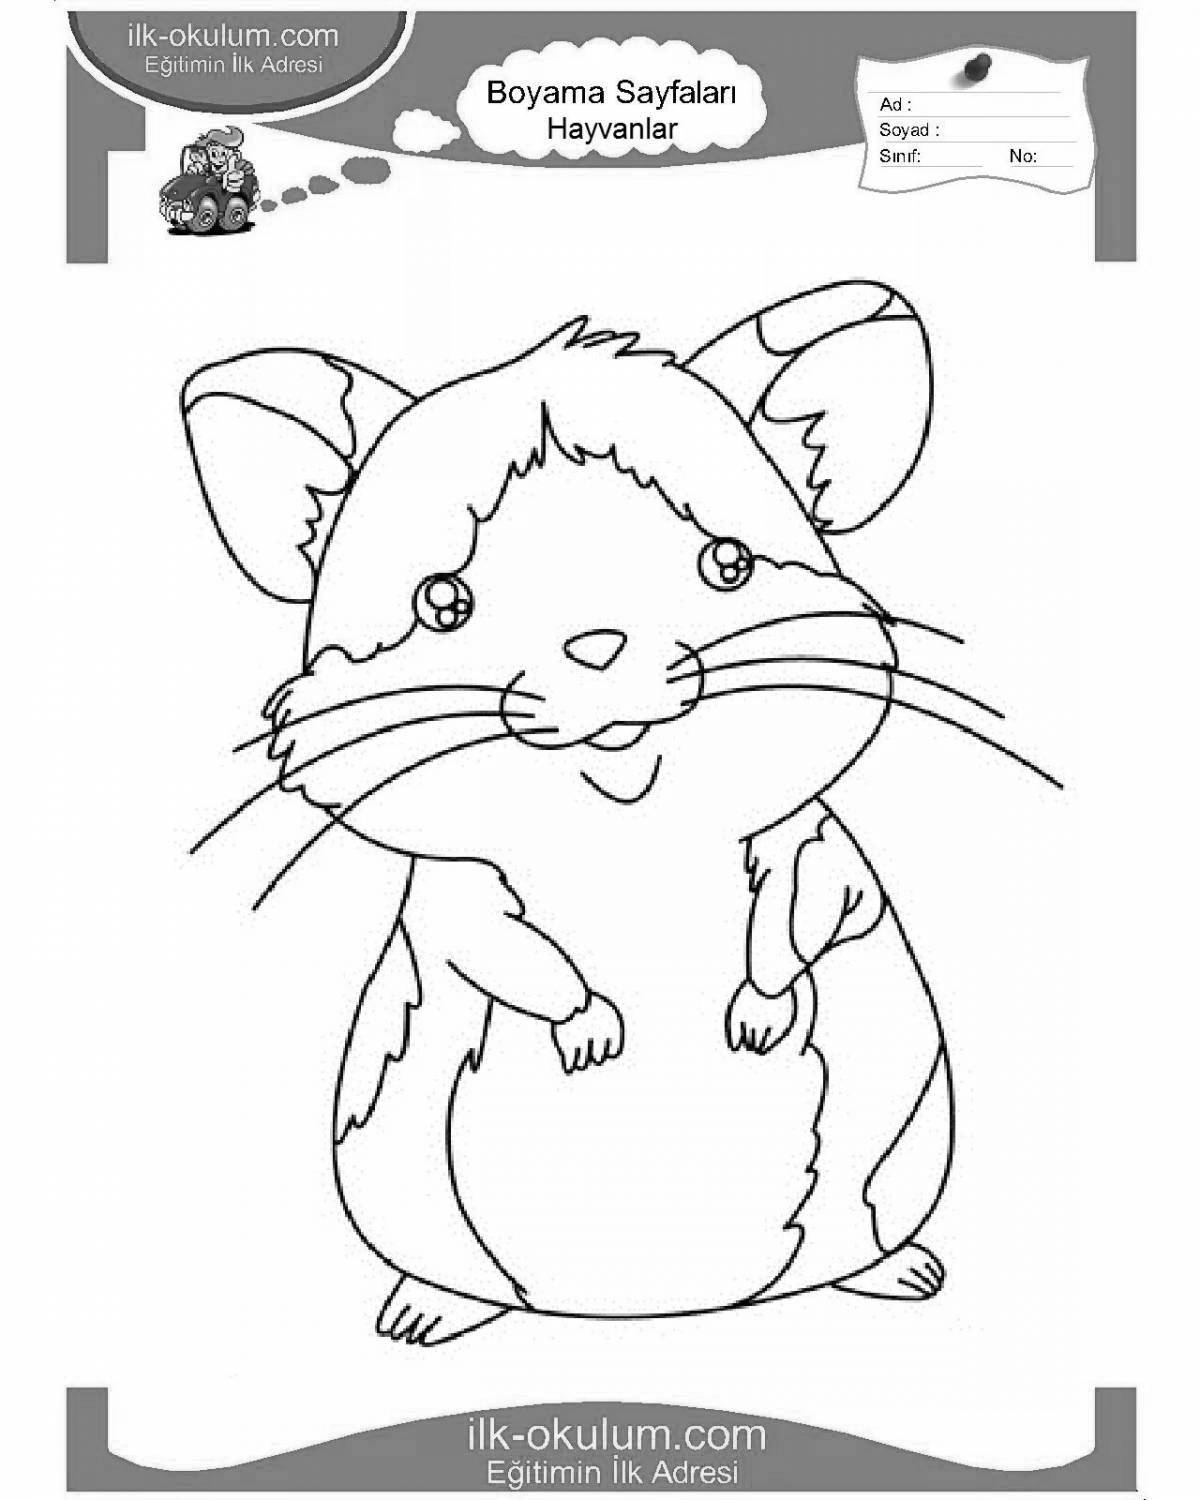 Furry hamster coloring pages